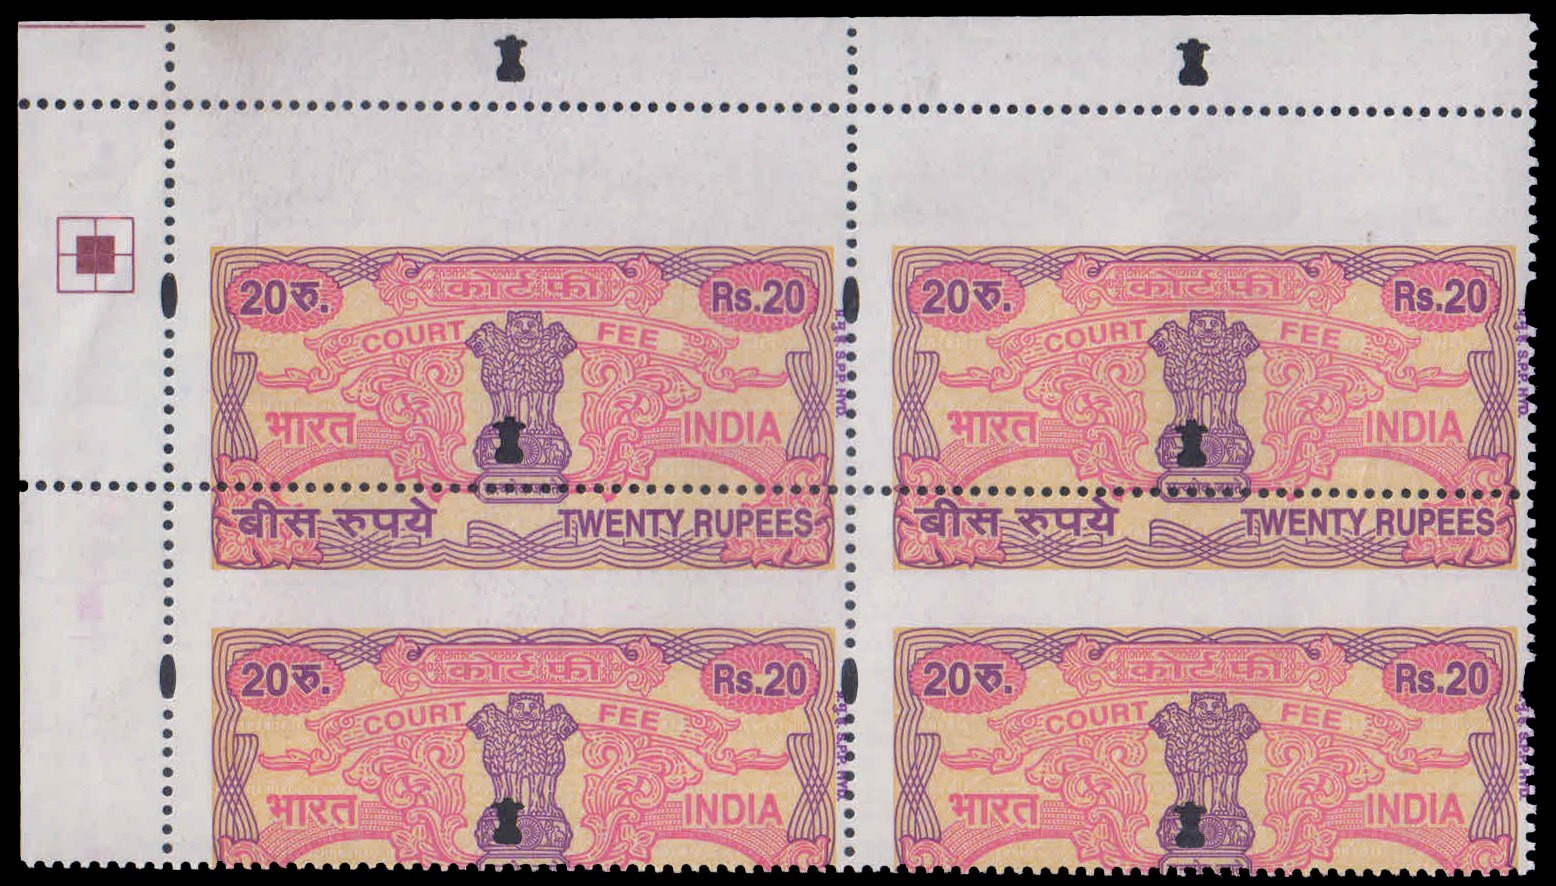 INDIA 20 Rs. Court Fee, Revenue Stamp, Perforation Shift Error as per scan, Upper Corner Block of 4, MNH